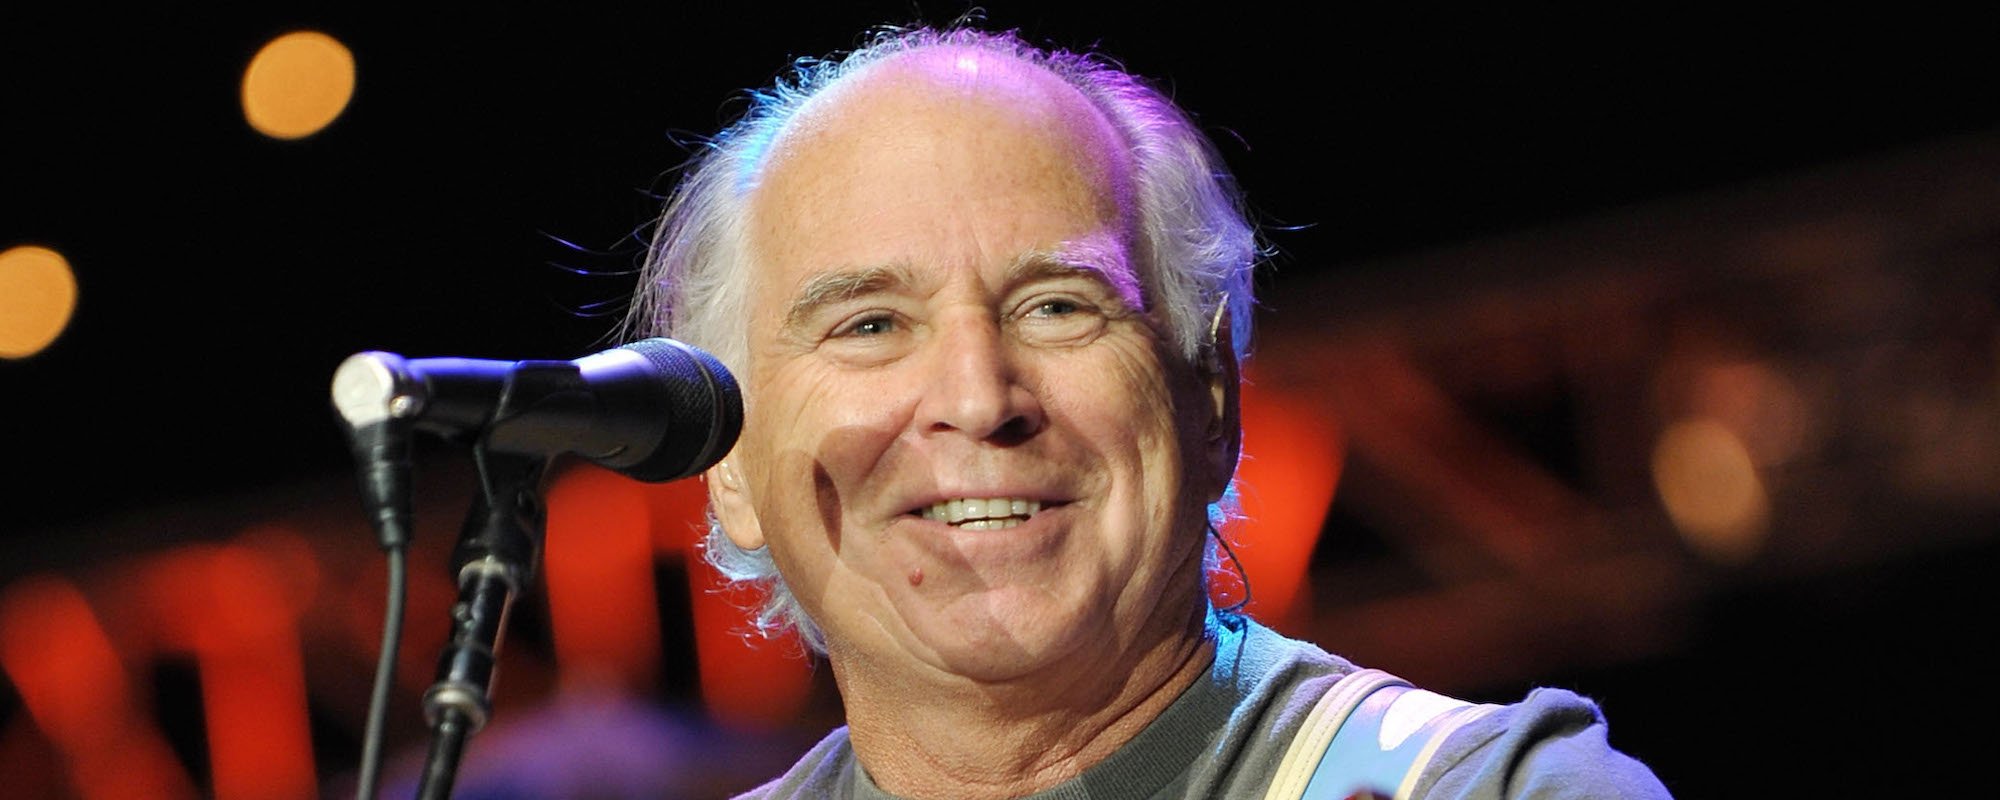 Watch: First Look at Jimmy Buffett's New Video "Like My Dog" with Pet Adoption Message